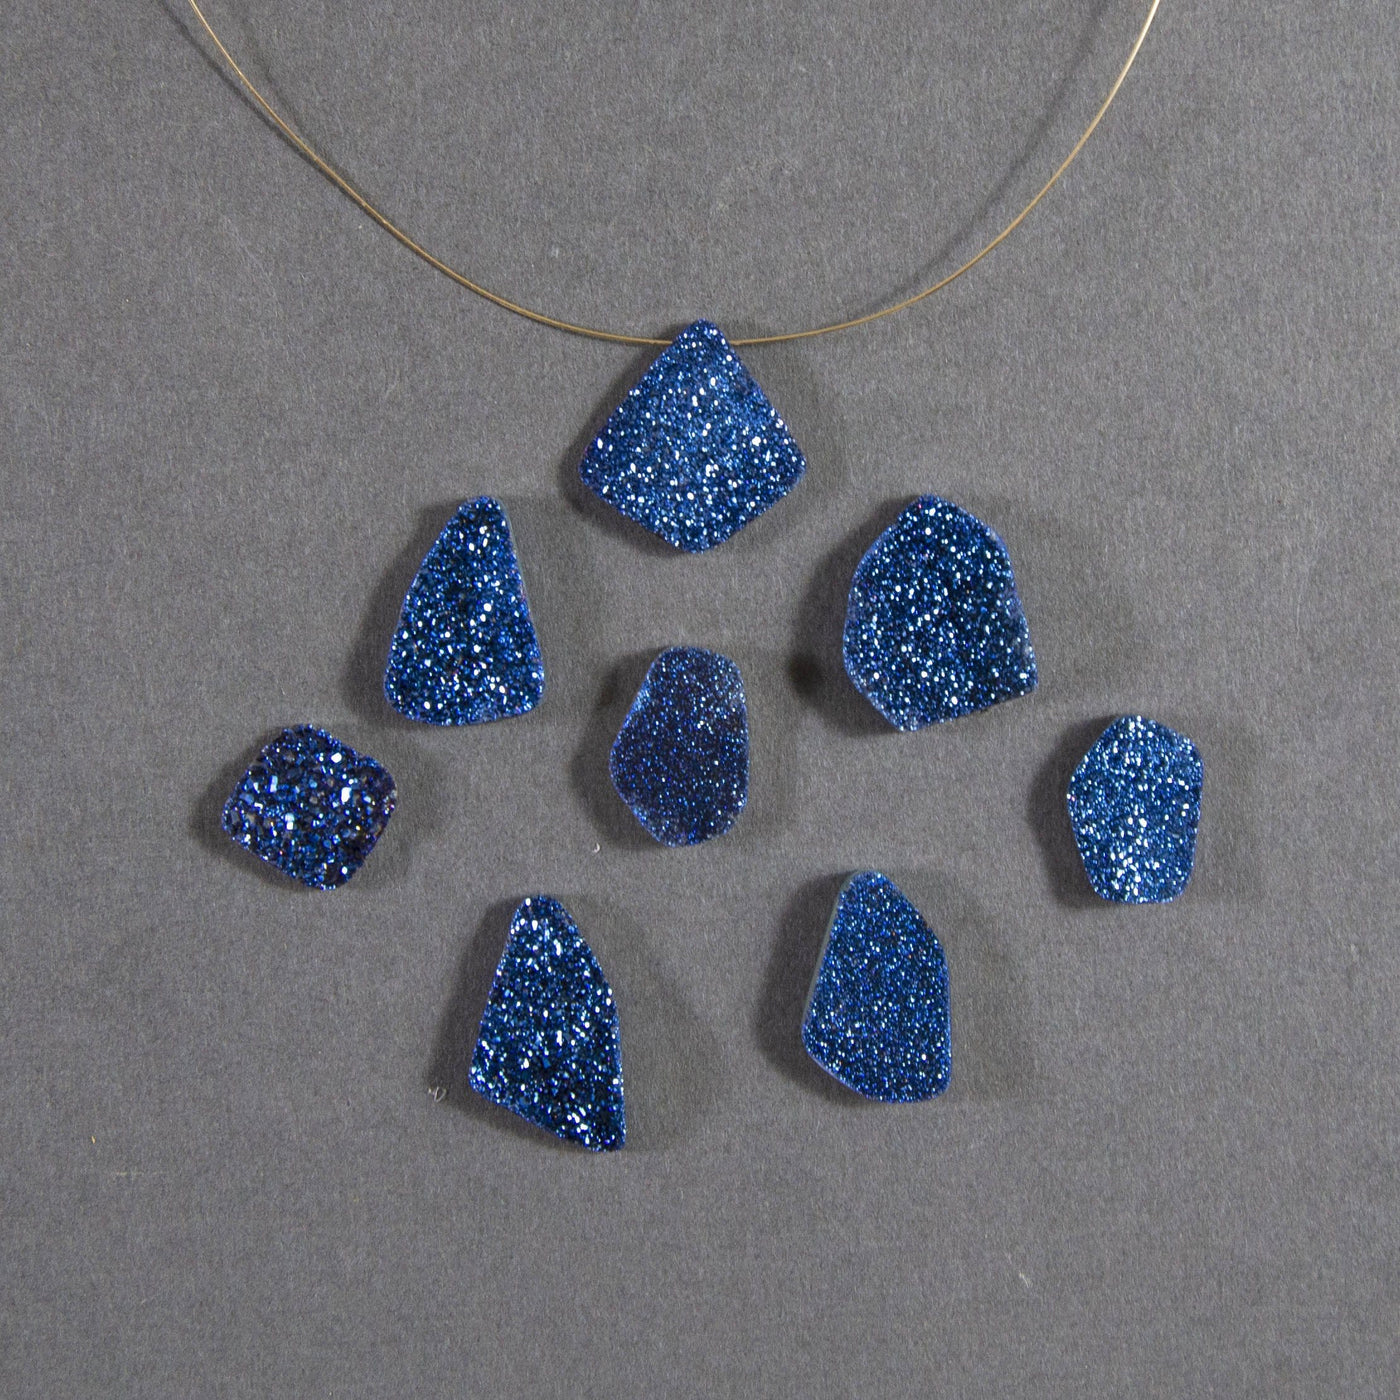 mystic blue druzy beads displayed with a wire through hole and up close to view various colors textures shapes sizes